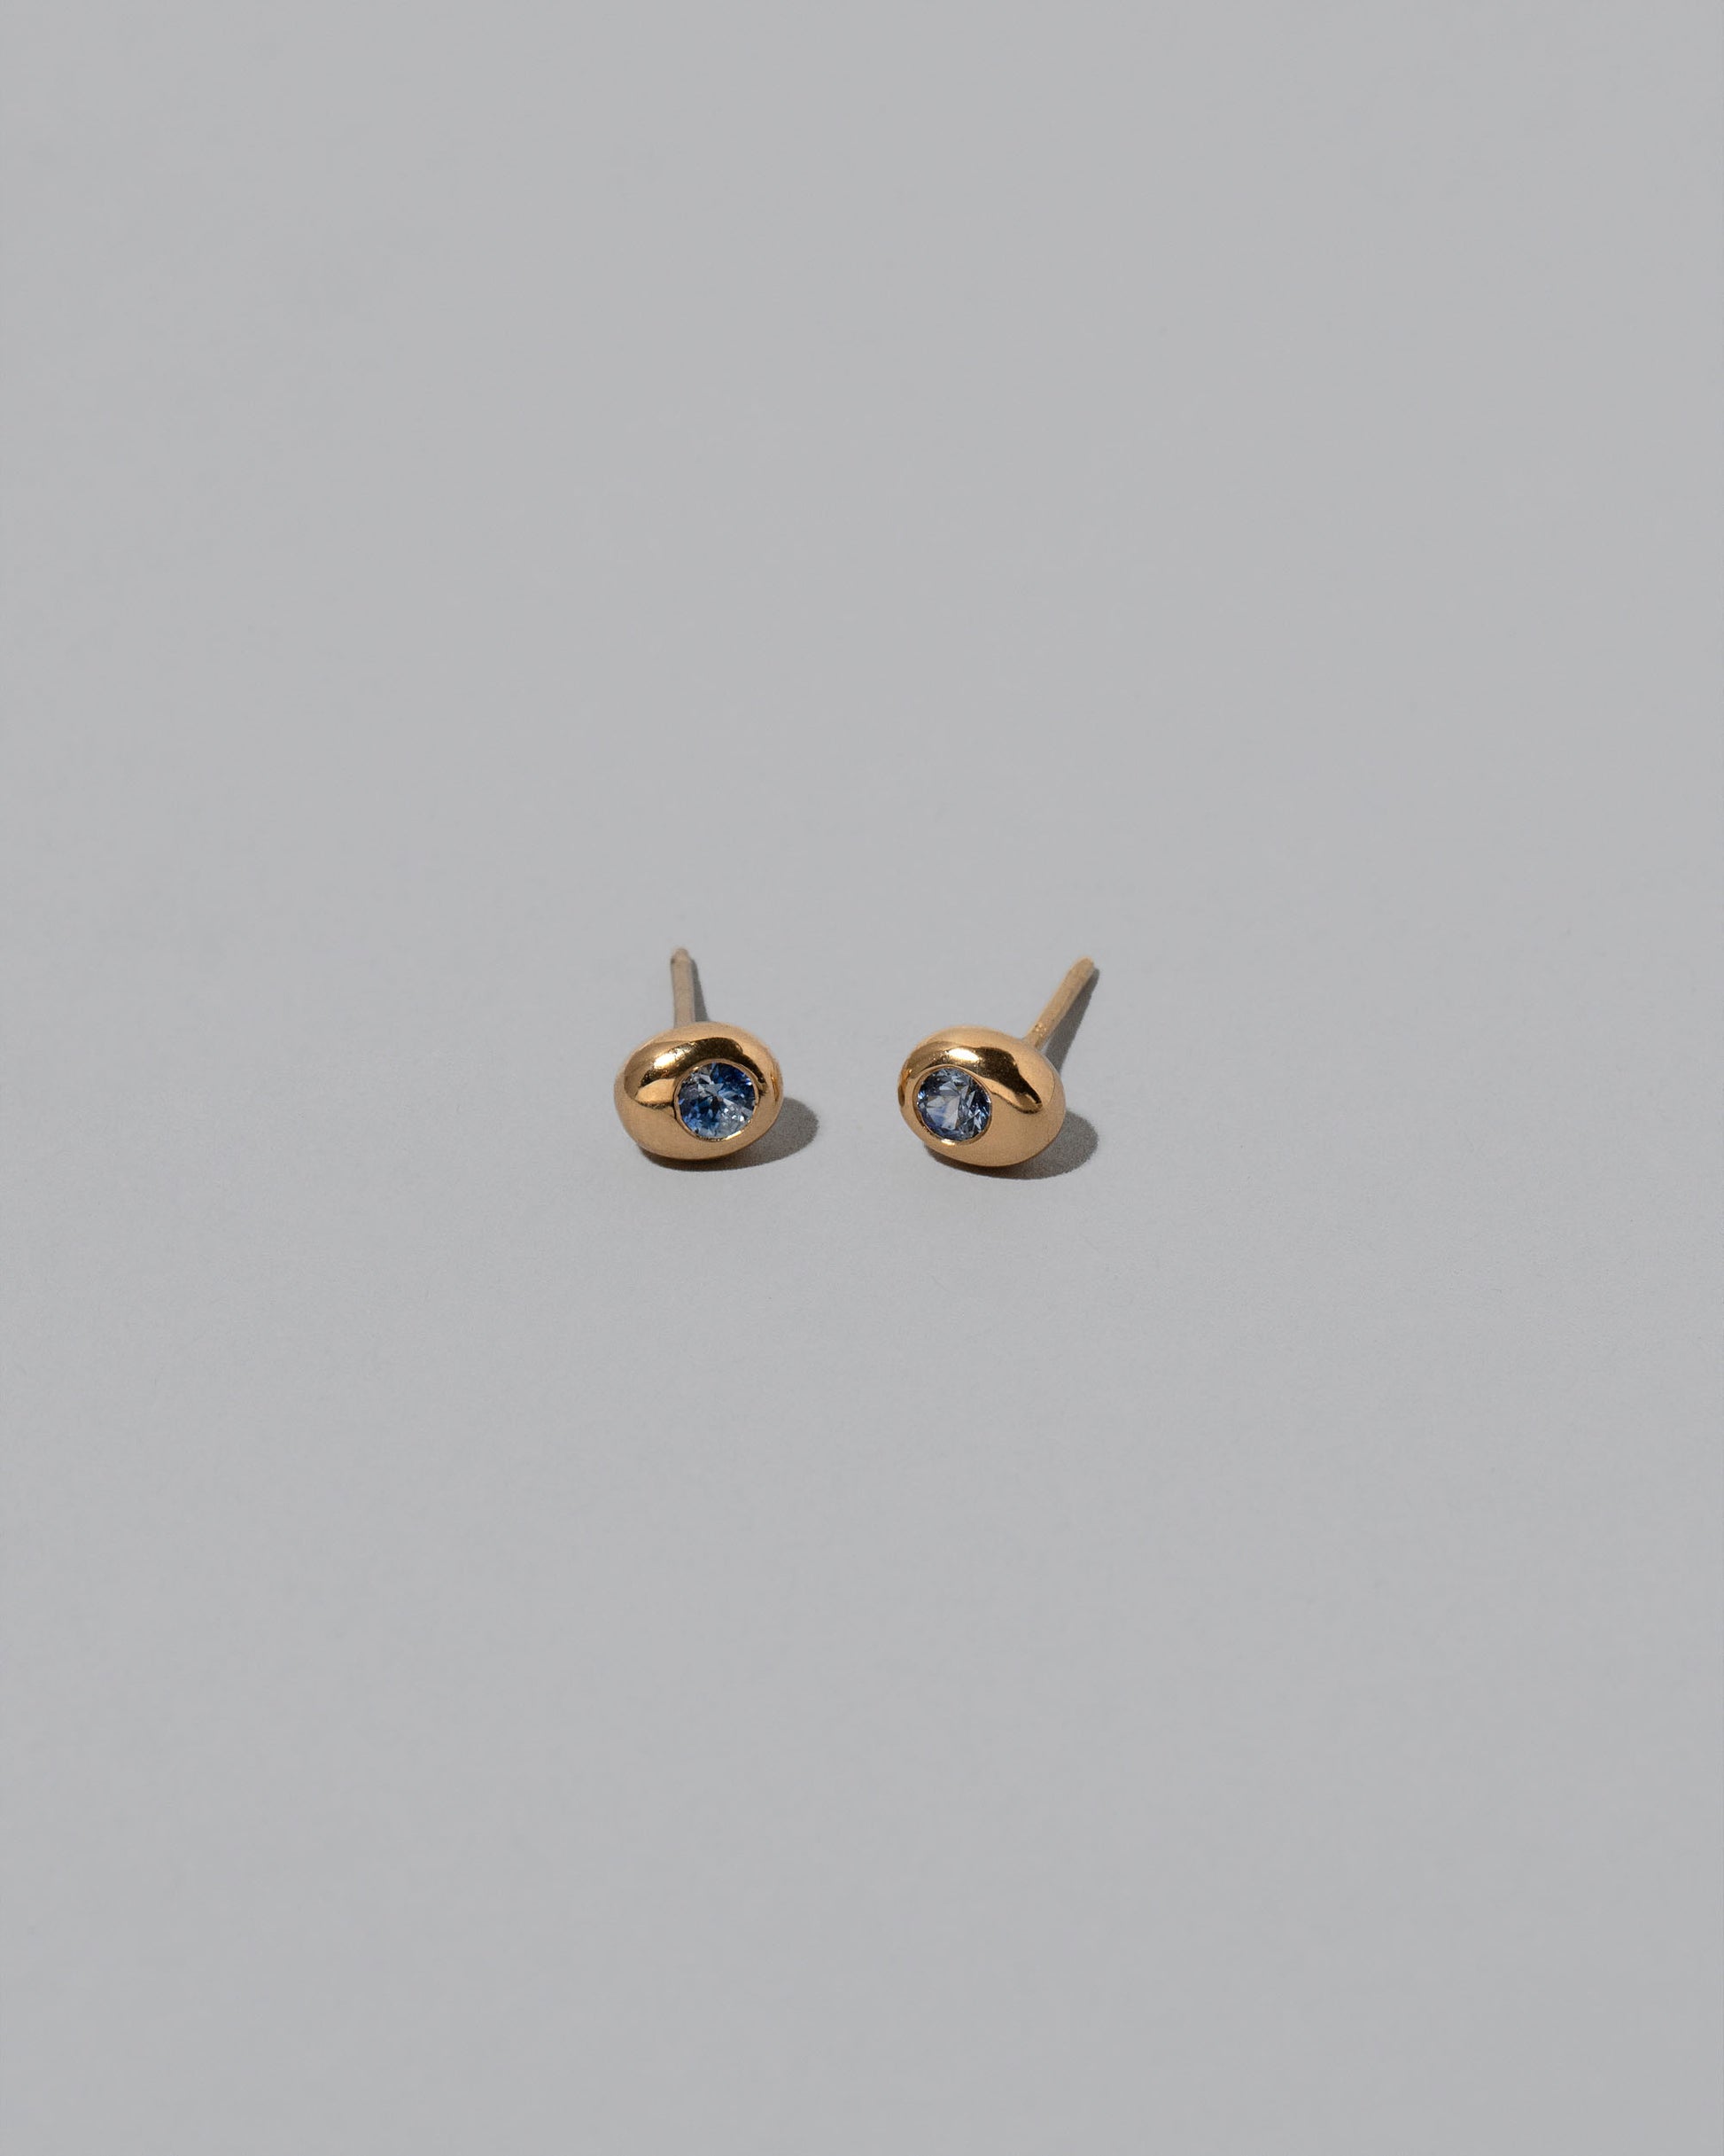 Yellow Gold Bicolor Blue Sapphire Level Stud Earrings on light color background